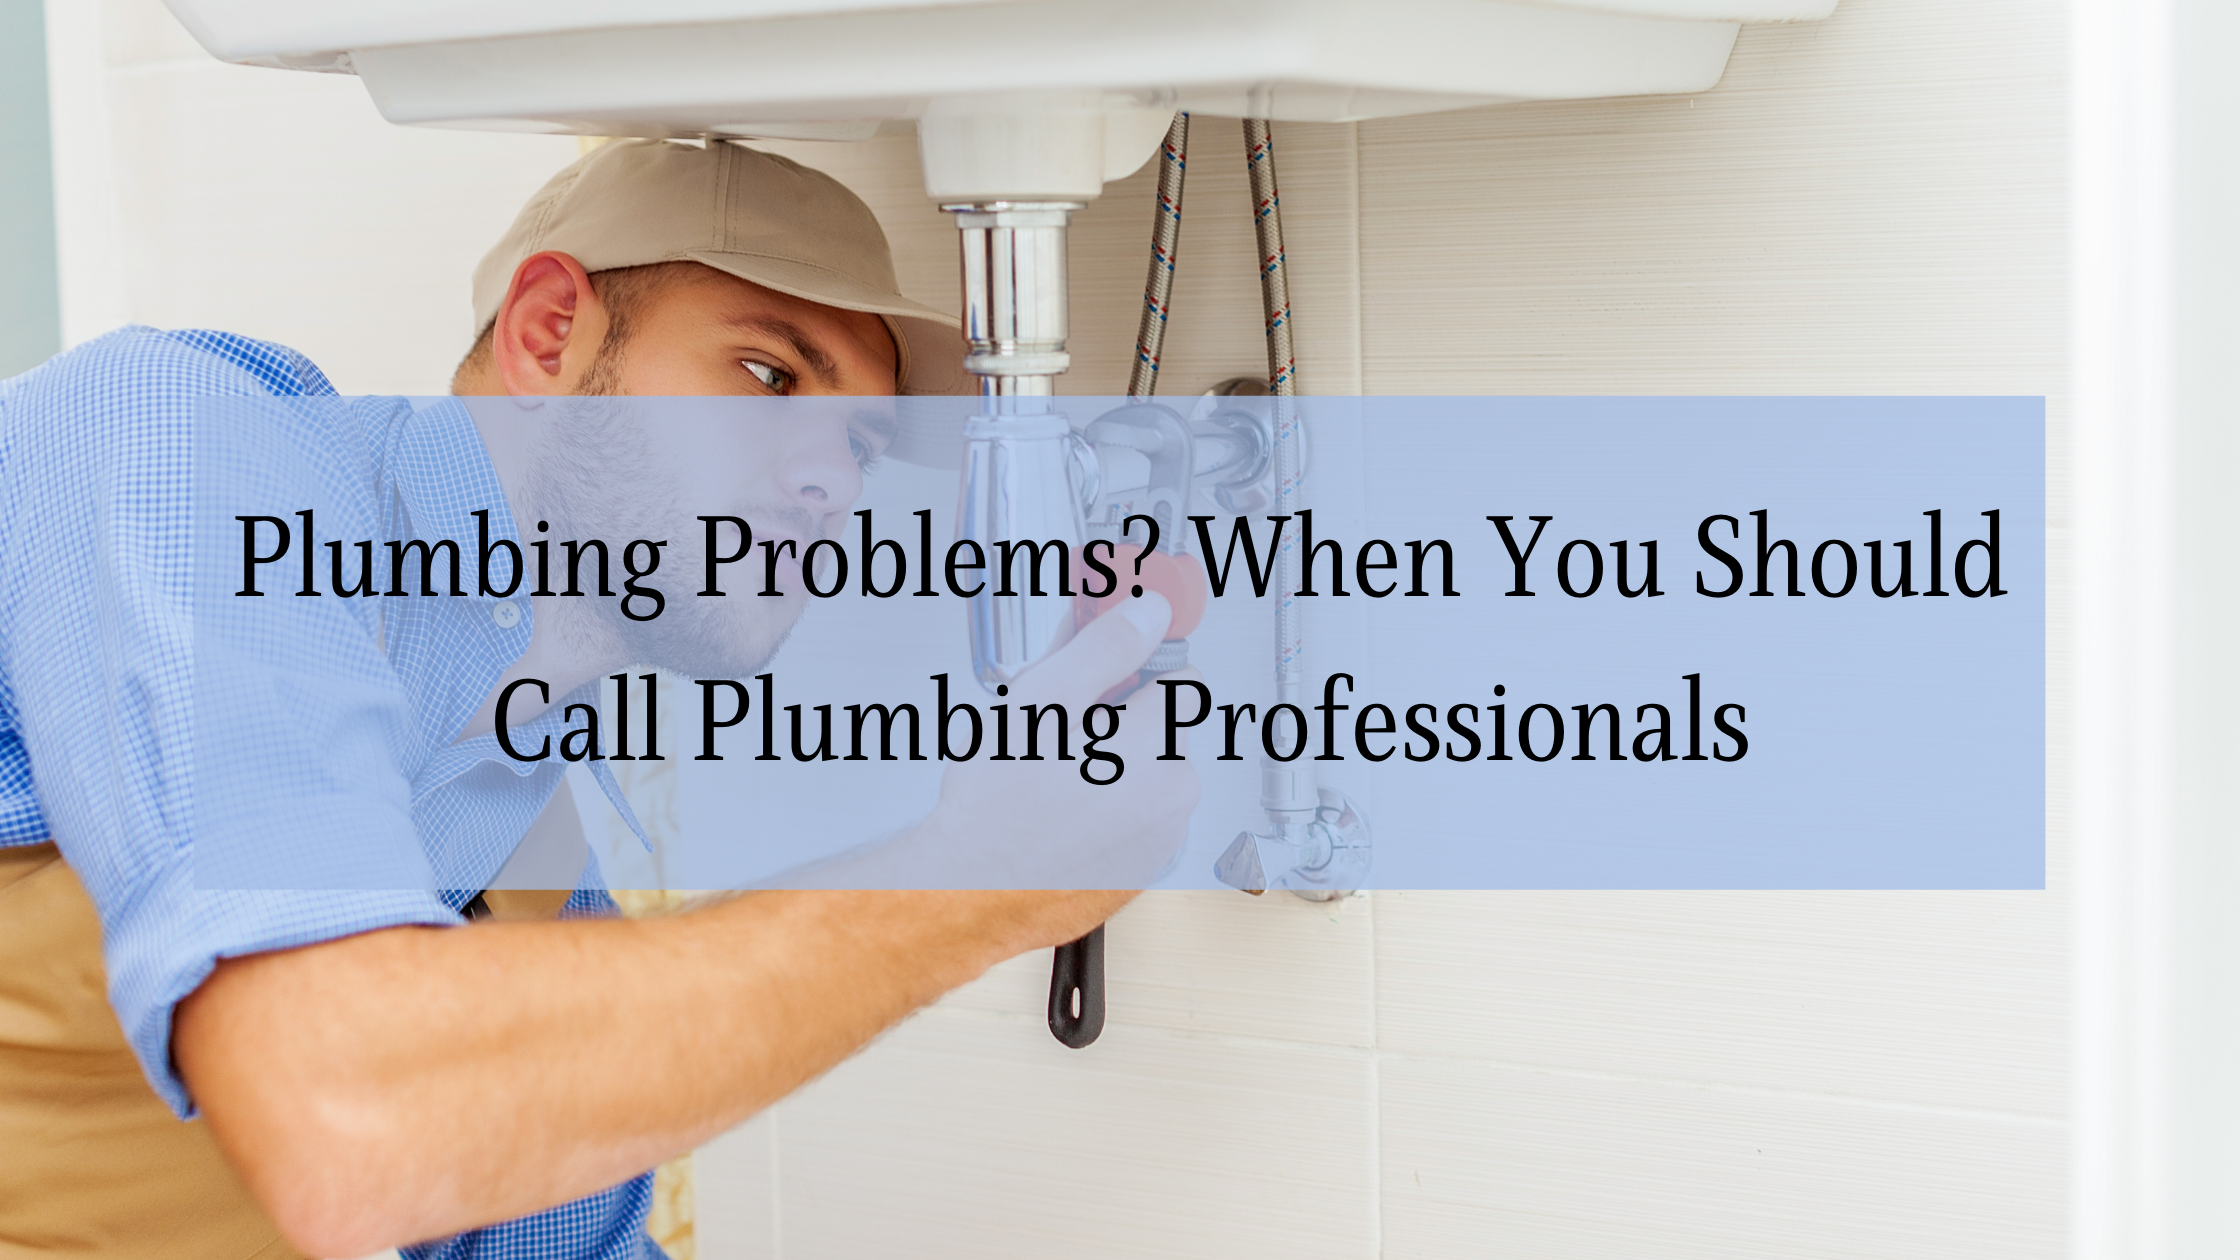 https://handymanconnection.com/wp-content/uploads/2021/05/Plumbing-Problems_-When-you-Should-Call-Plumbing-Professionals.png